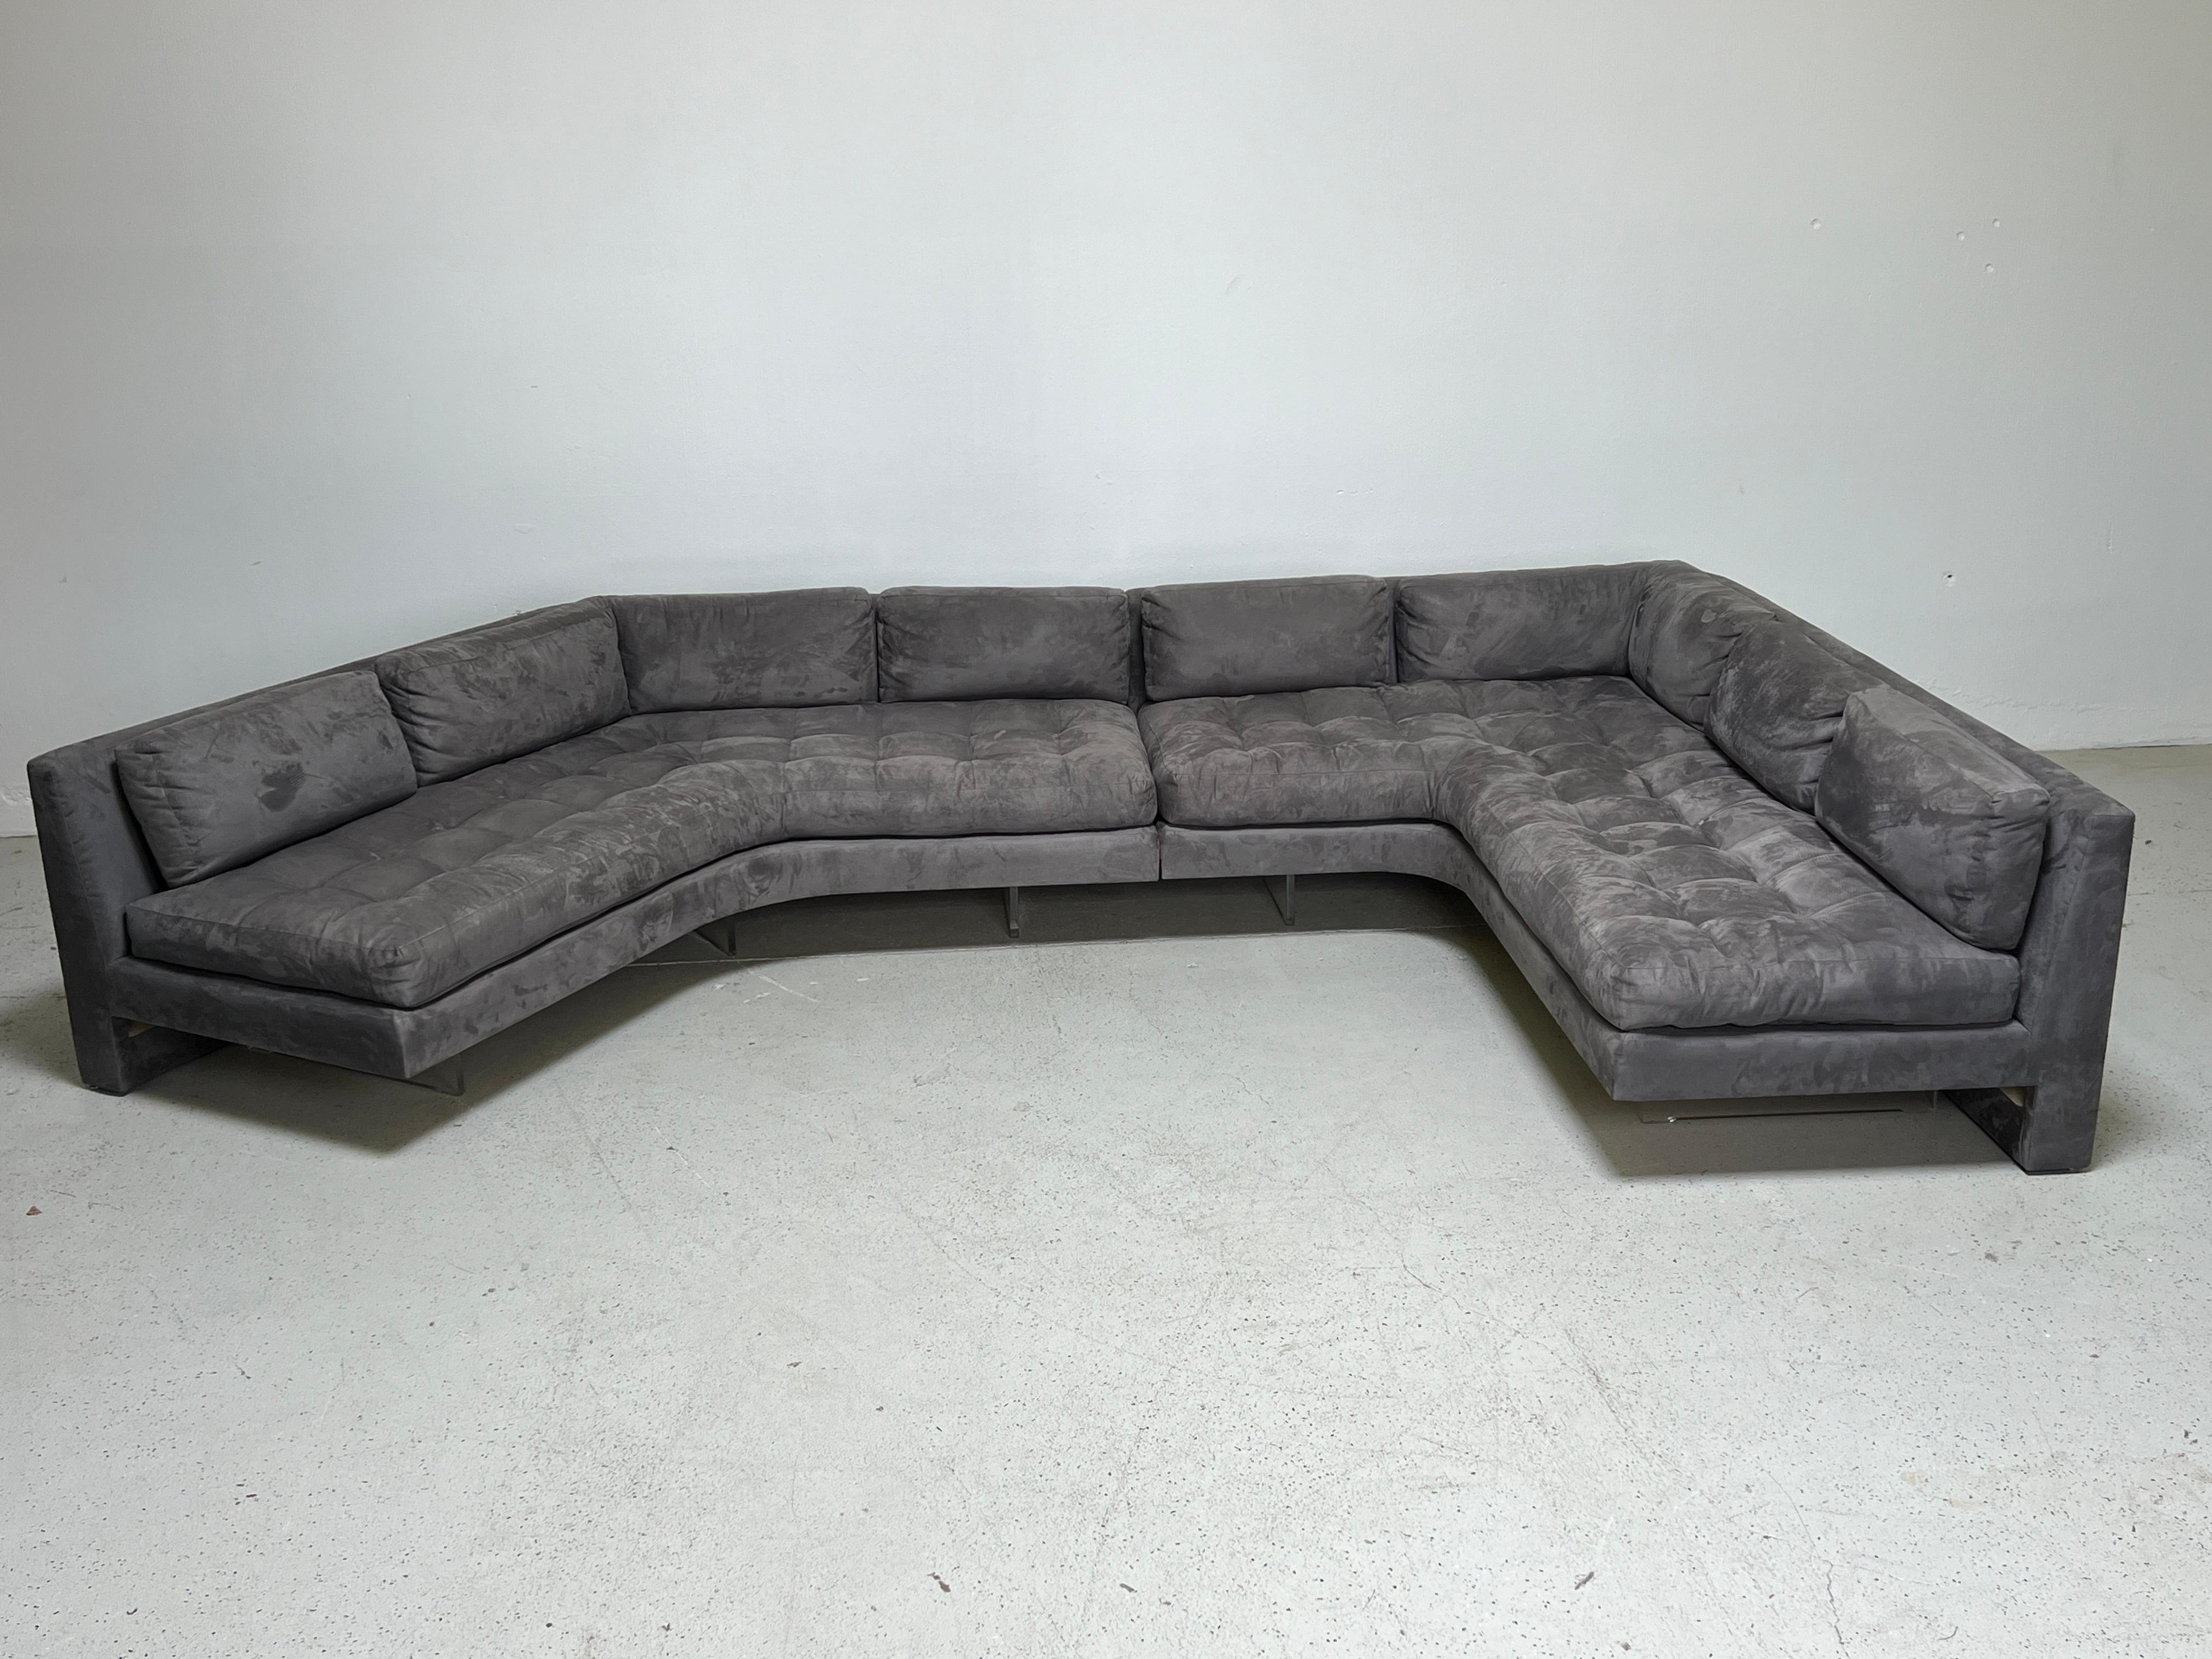 A two piece Omnibus sectional sofa designed by Vladimir Kagan. The two pieces can be rearranged as shown in photos. The original built-in lighting was an upgrade offered by Kagan. Very comfortable with down seat and back cushions. Reupholstered in